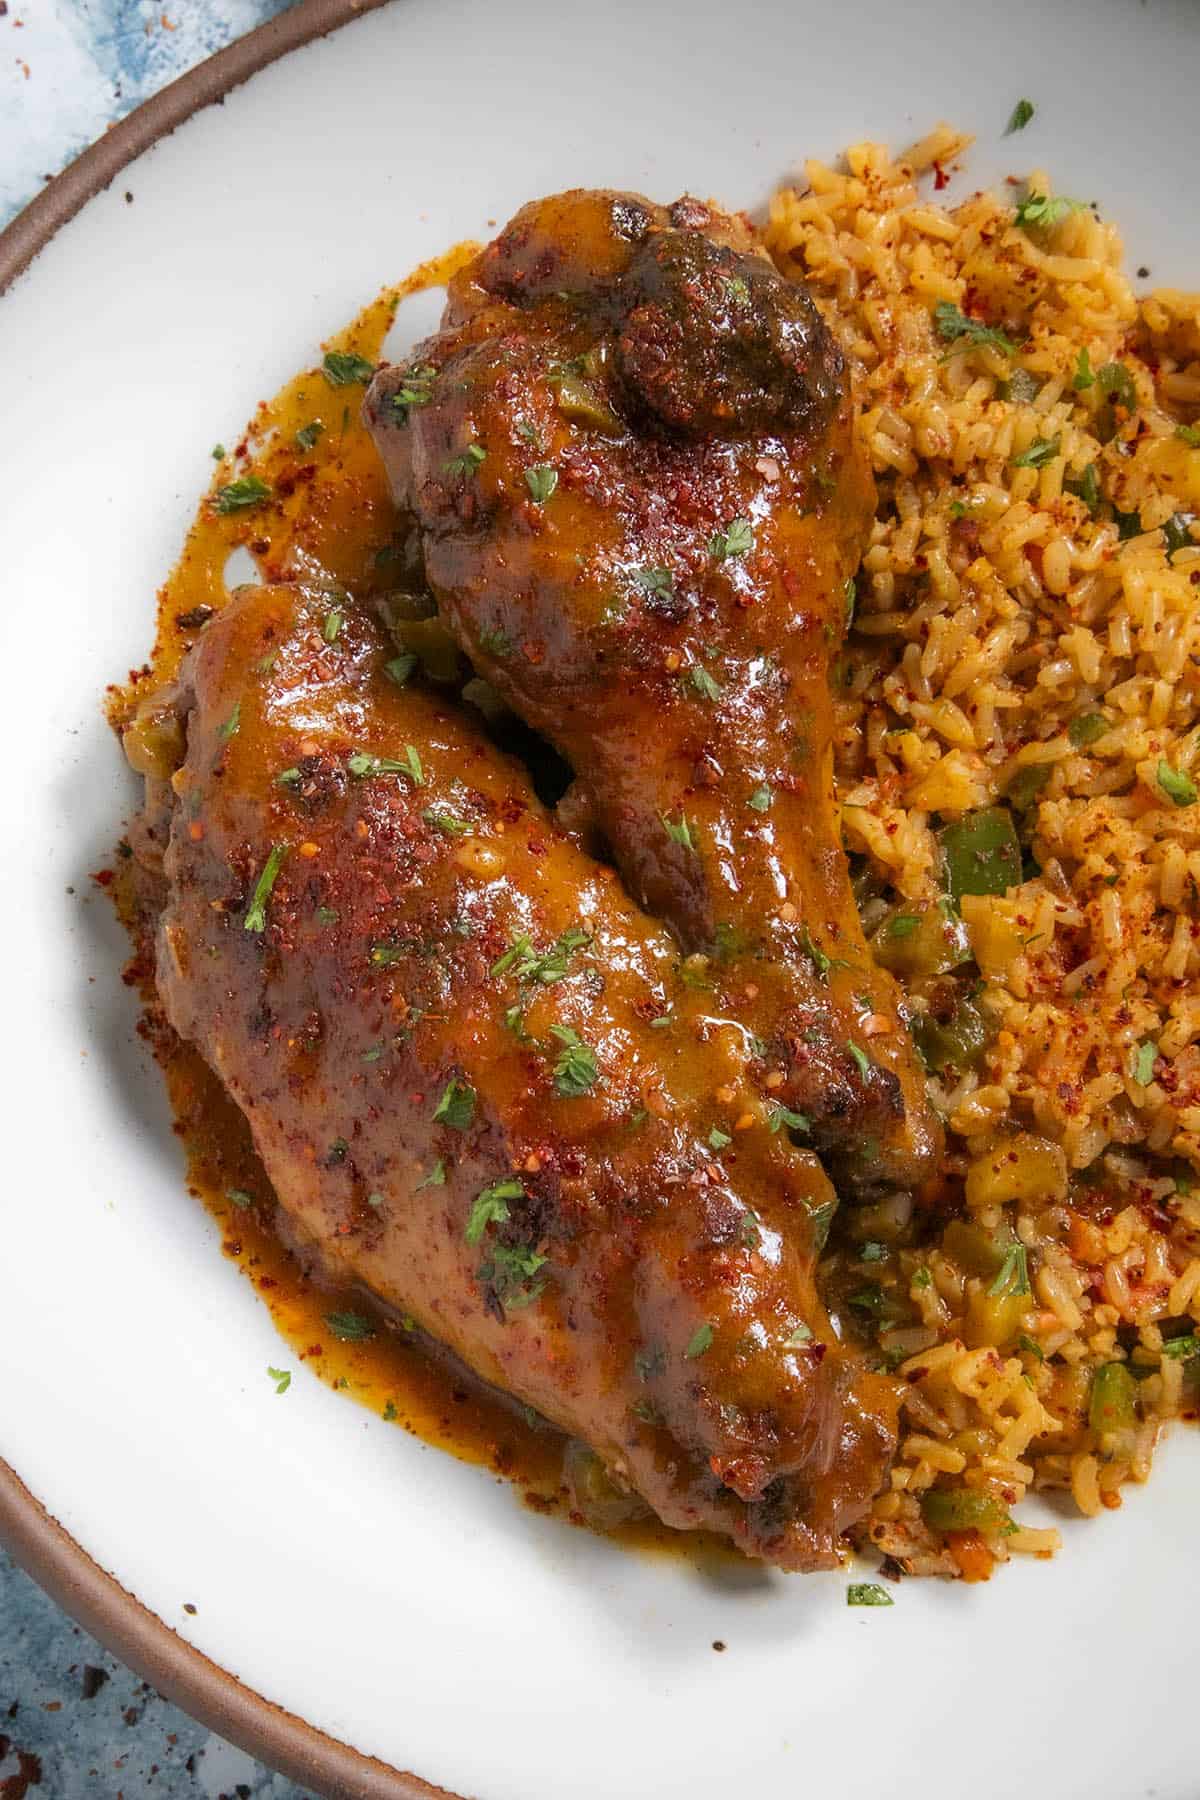 Two Smothered Turkey Wings served over a bed of rice